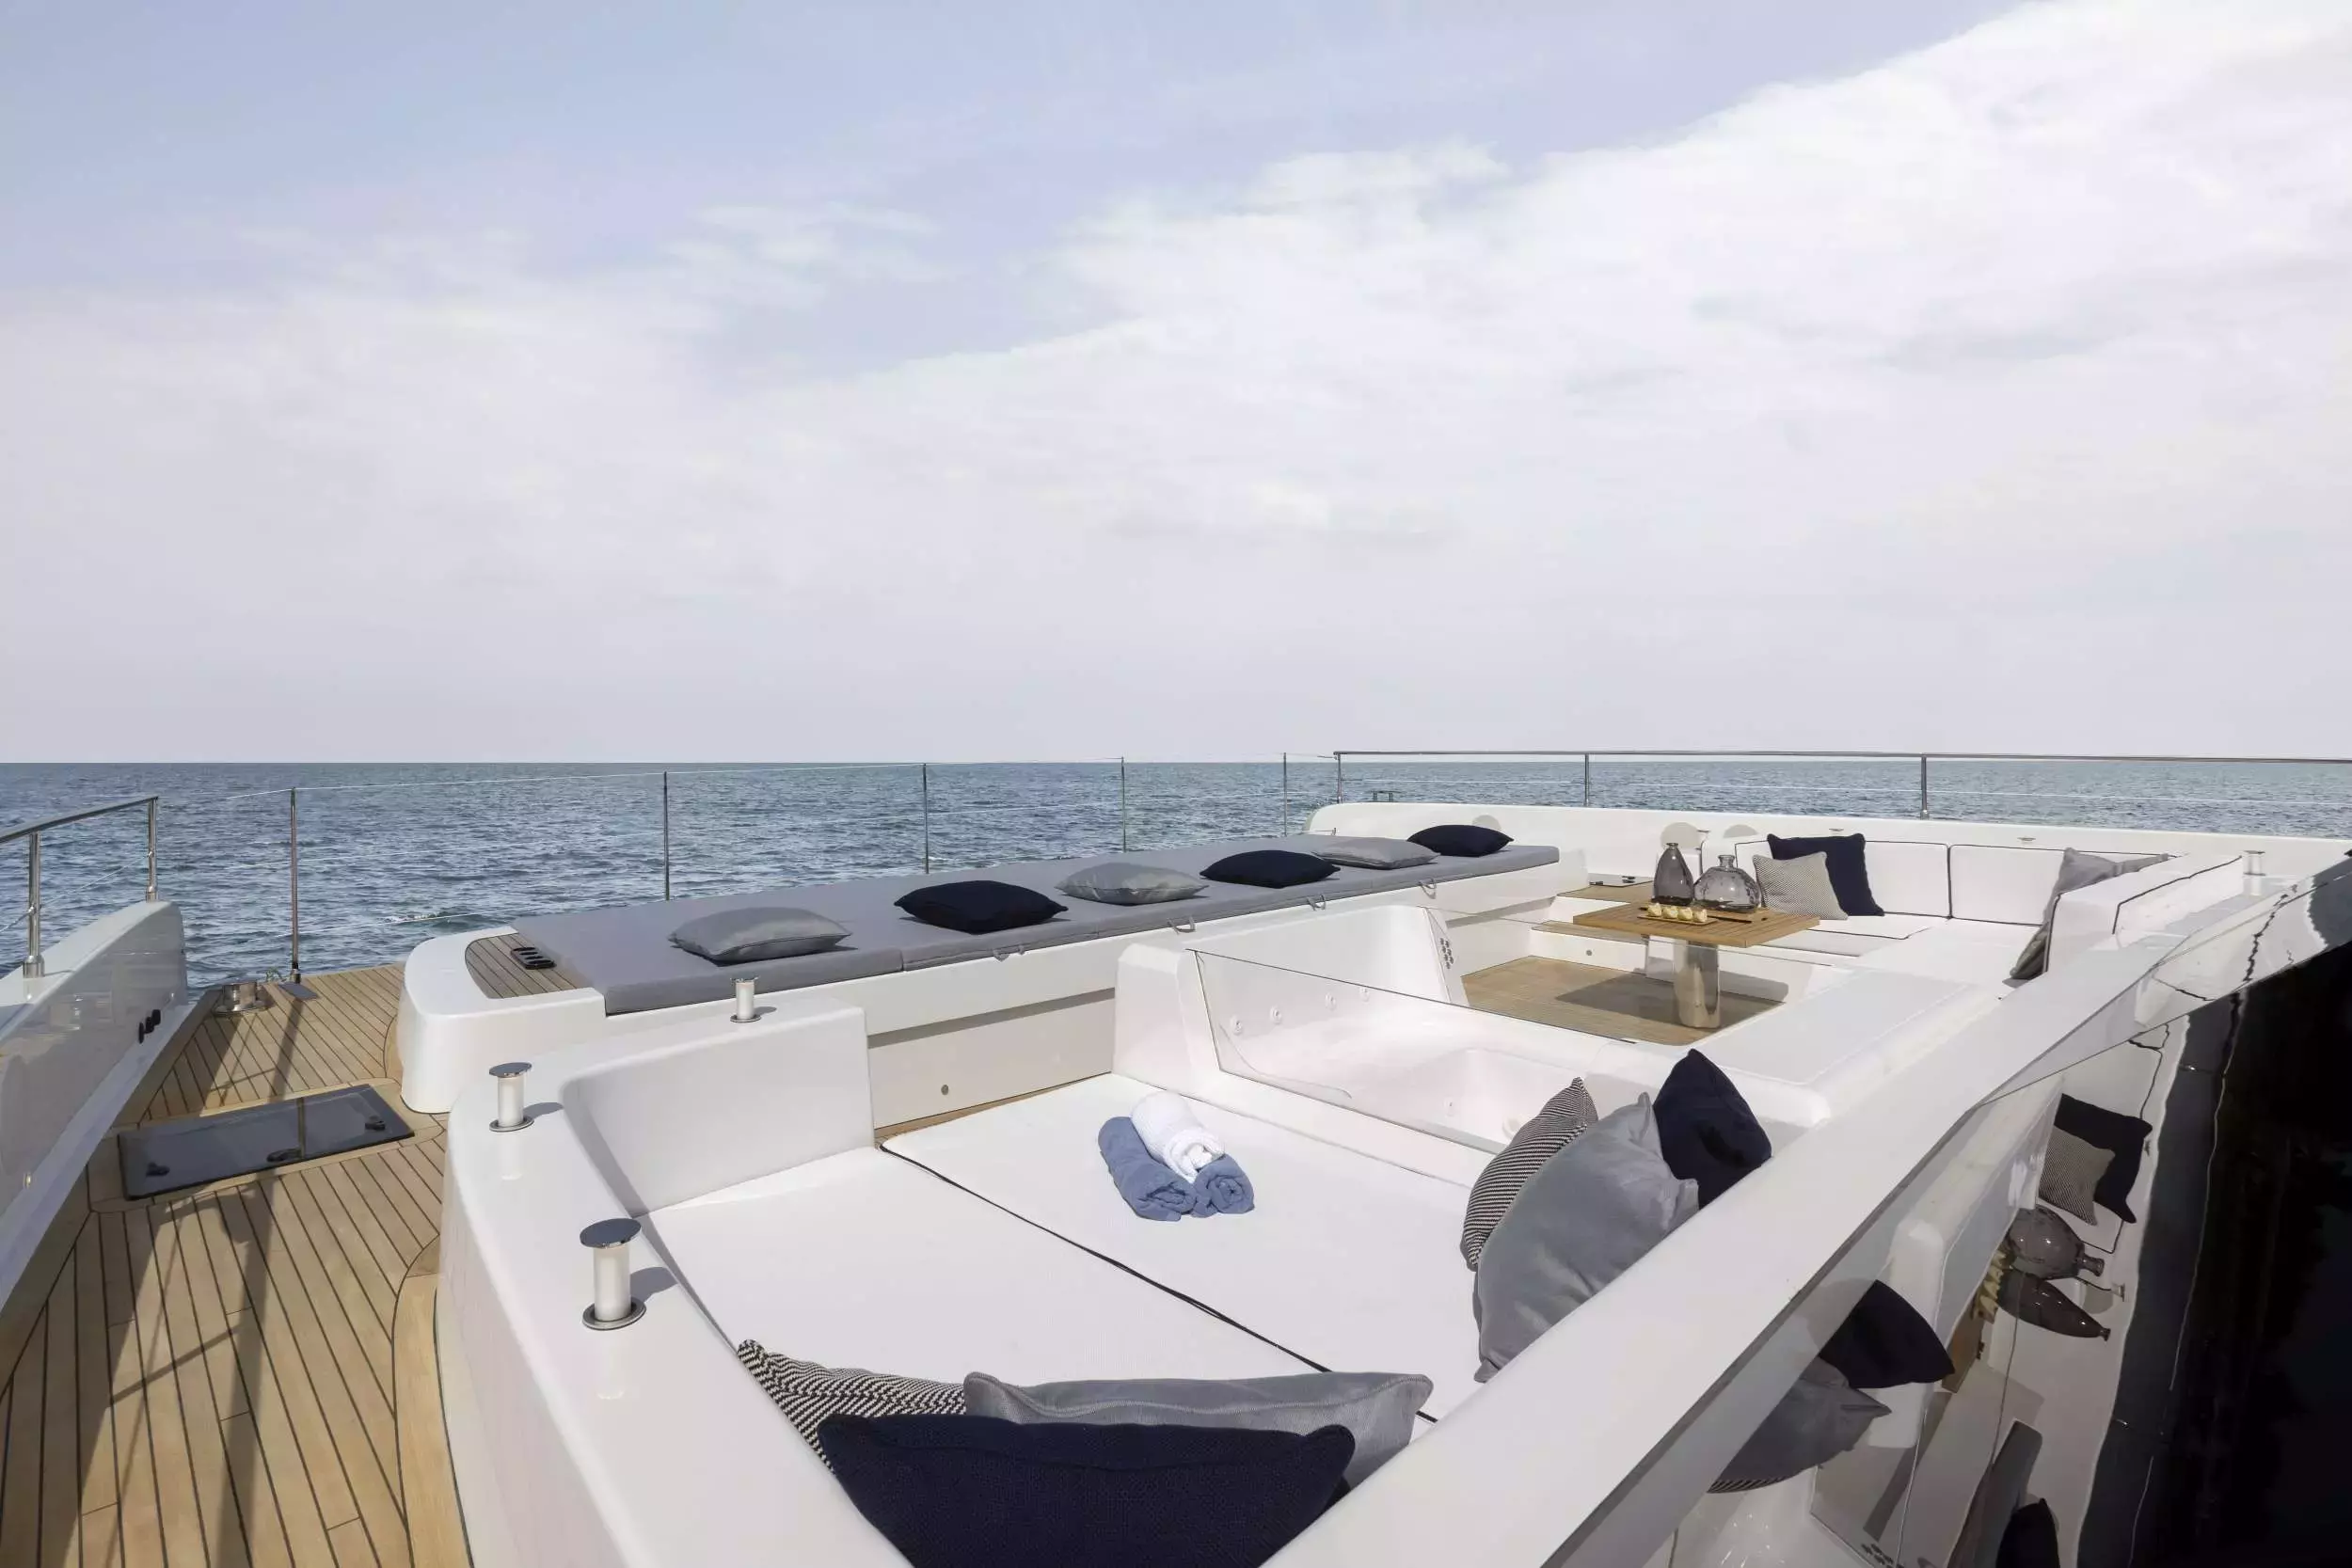 Pronto by Sunreef Yachts - Special Offer for a private Power Catamaran Rental in Freeport with a crew